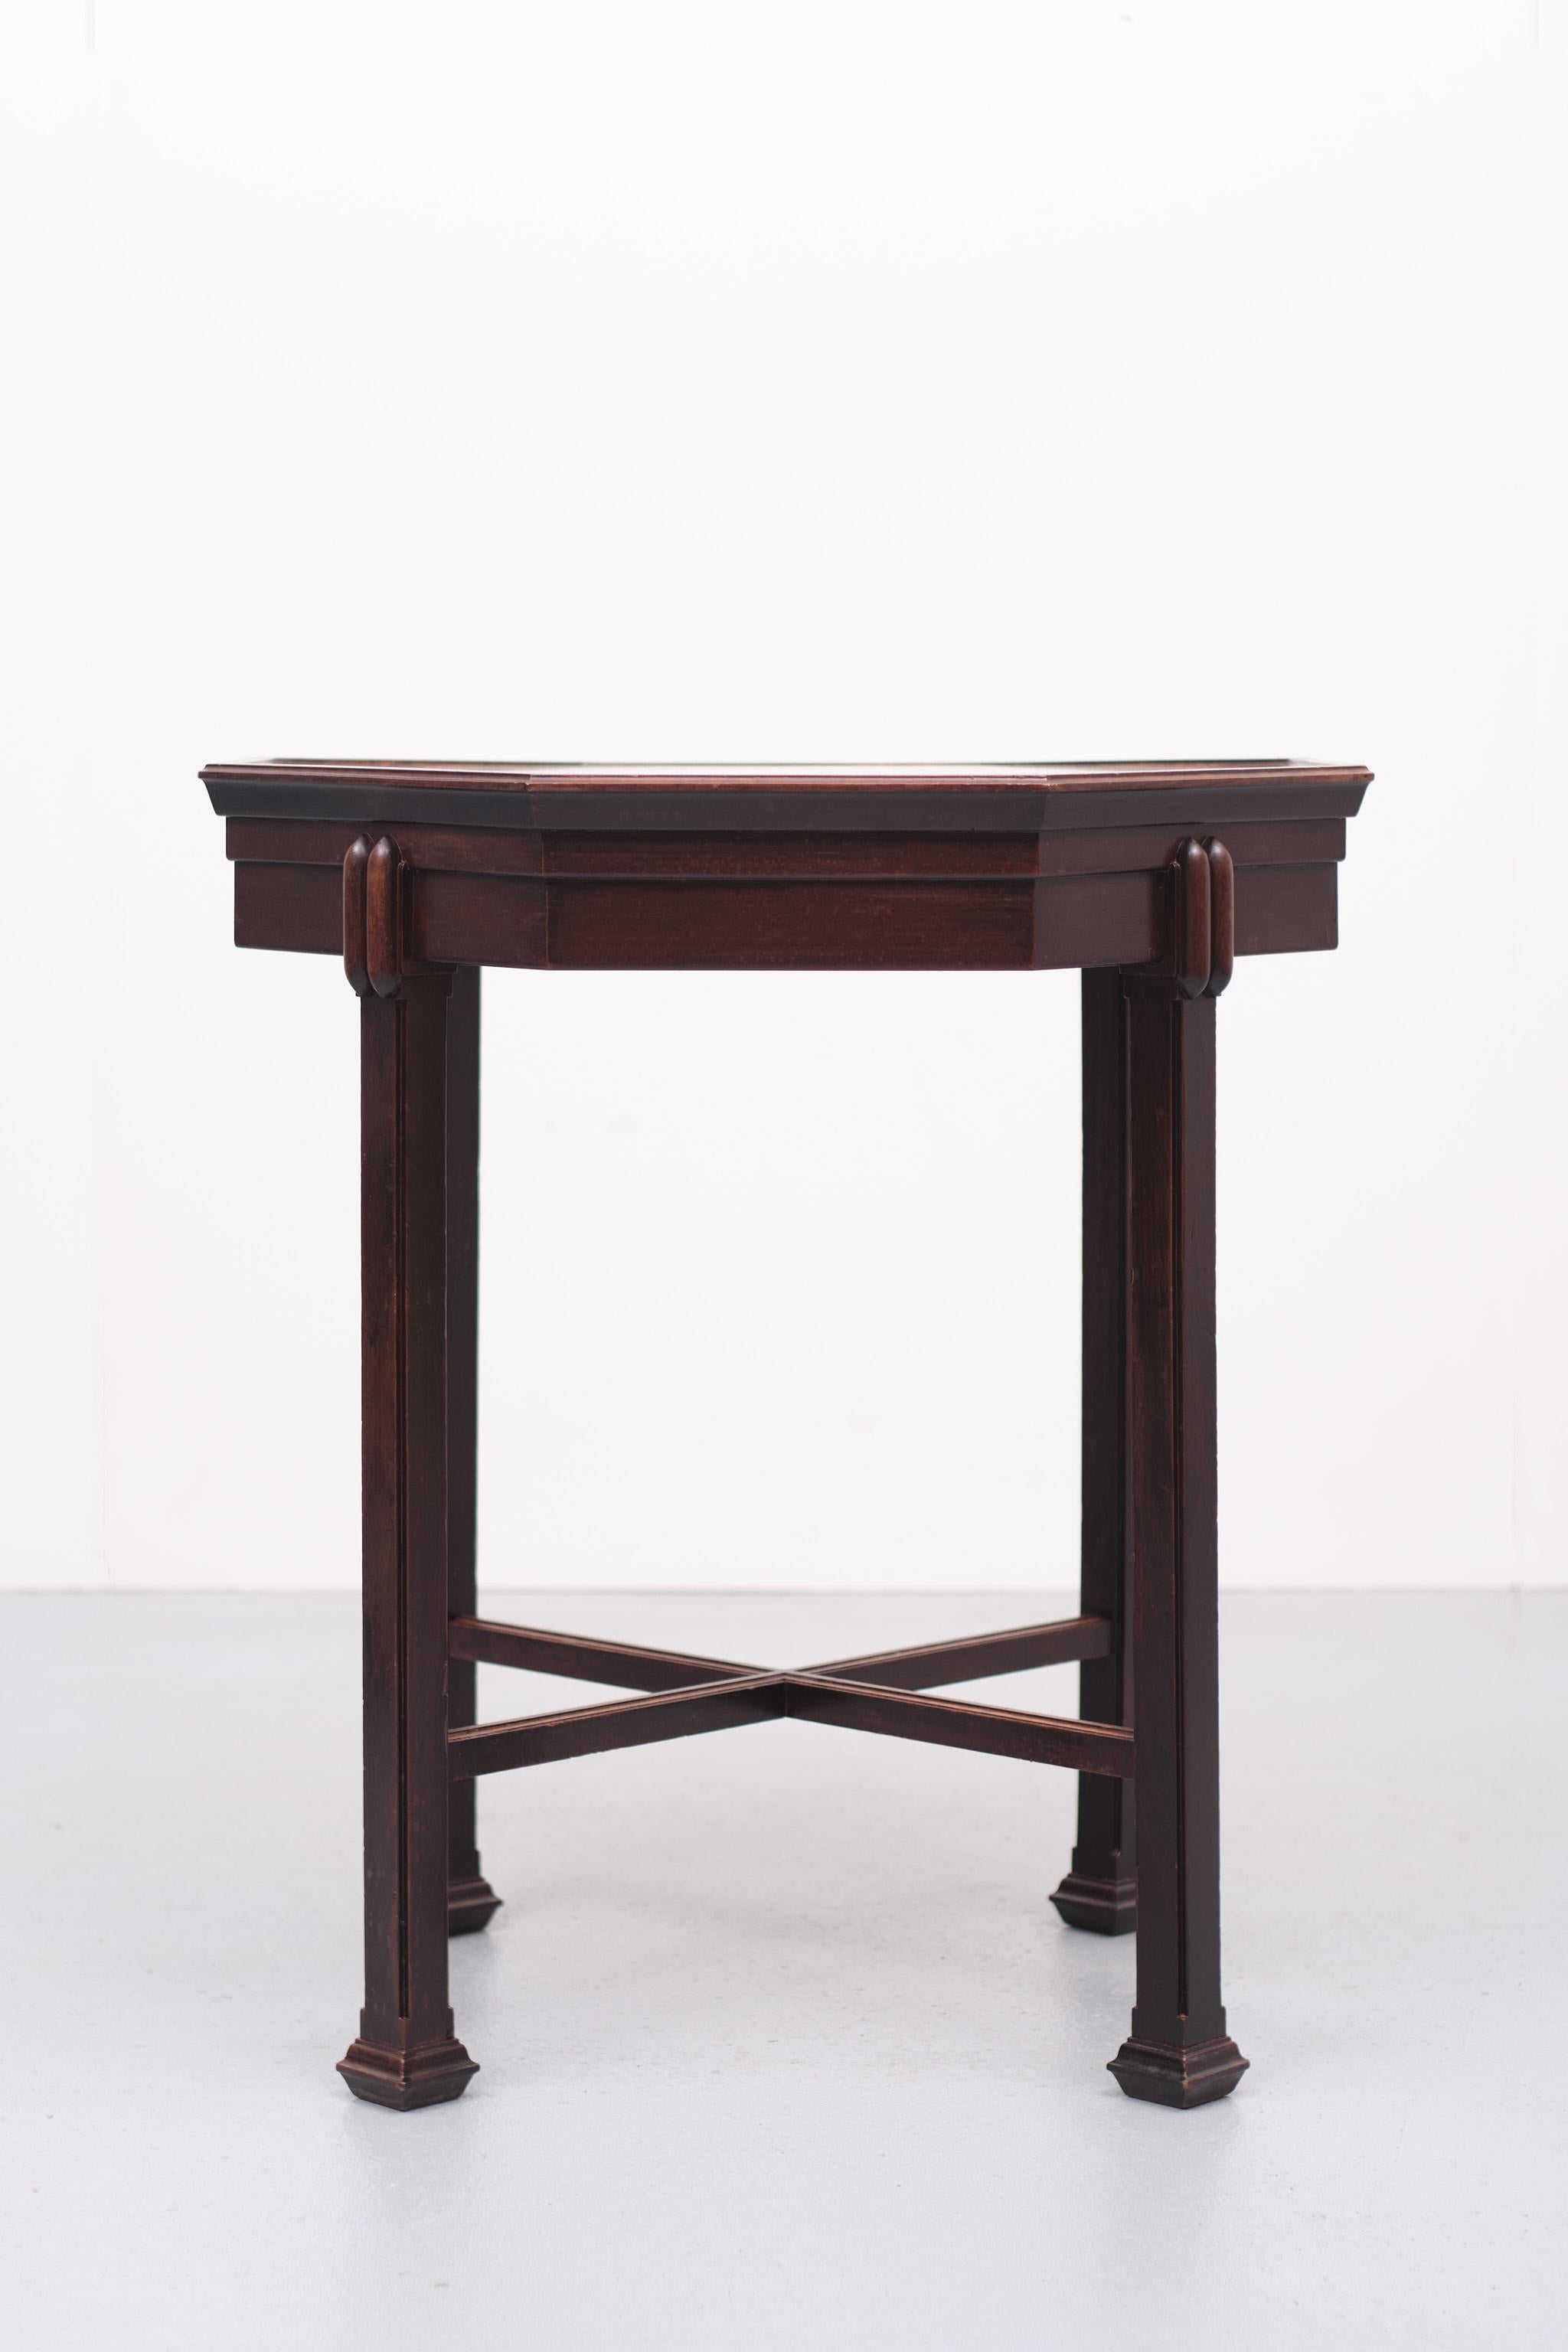 Beautiful octagonal side table, Architectural Design. lots of details in this
table, Amsterdamse School in style. Like the front of a Art Deco building. Mahogany and some fruit wood inlay. new glass top.